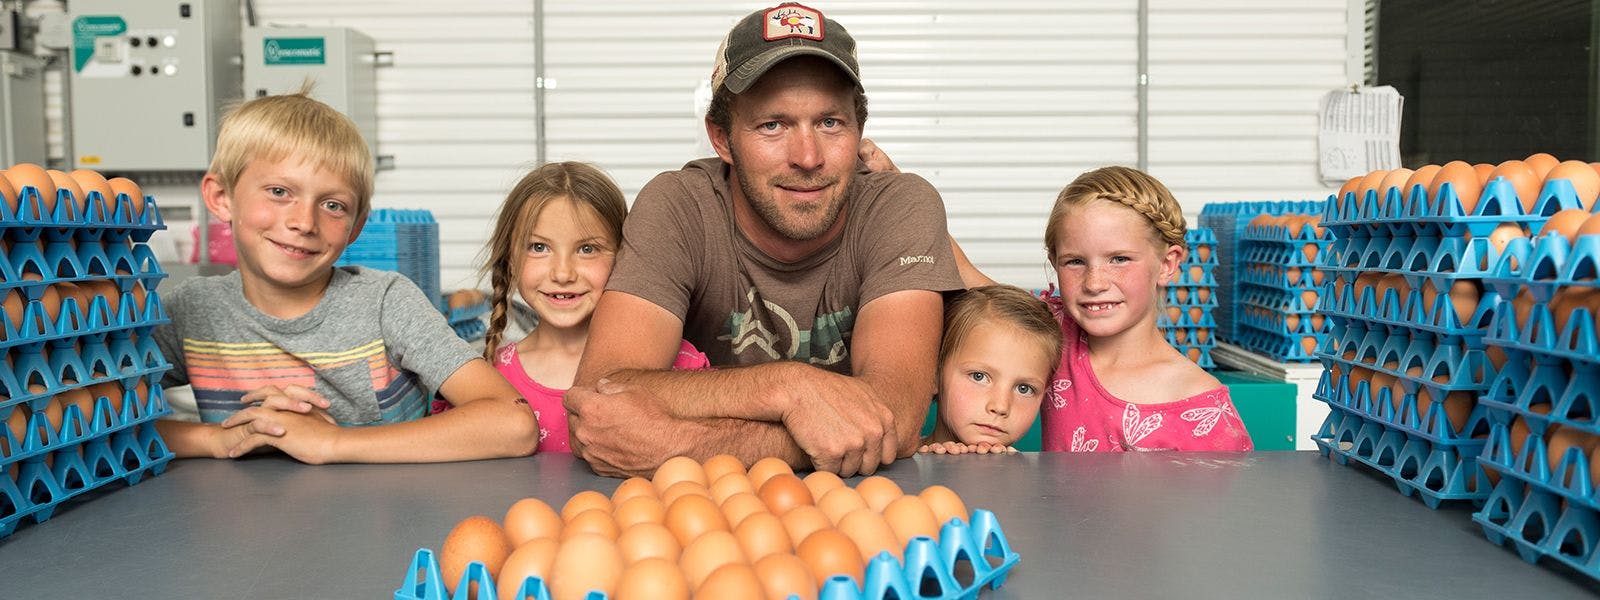 Farmer and his children surrounded by organic eggs.